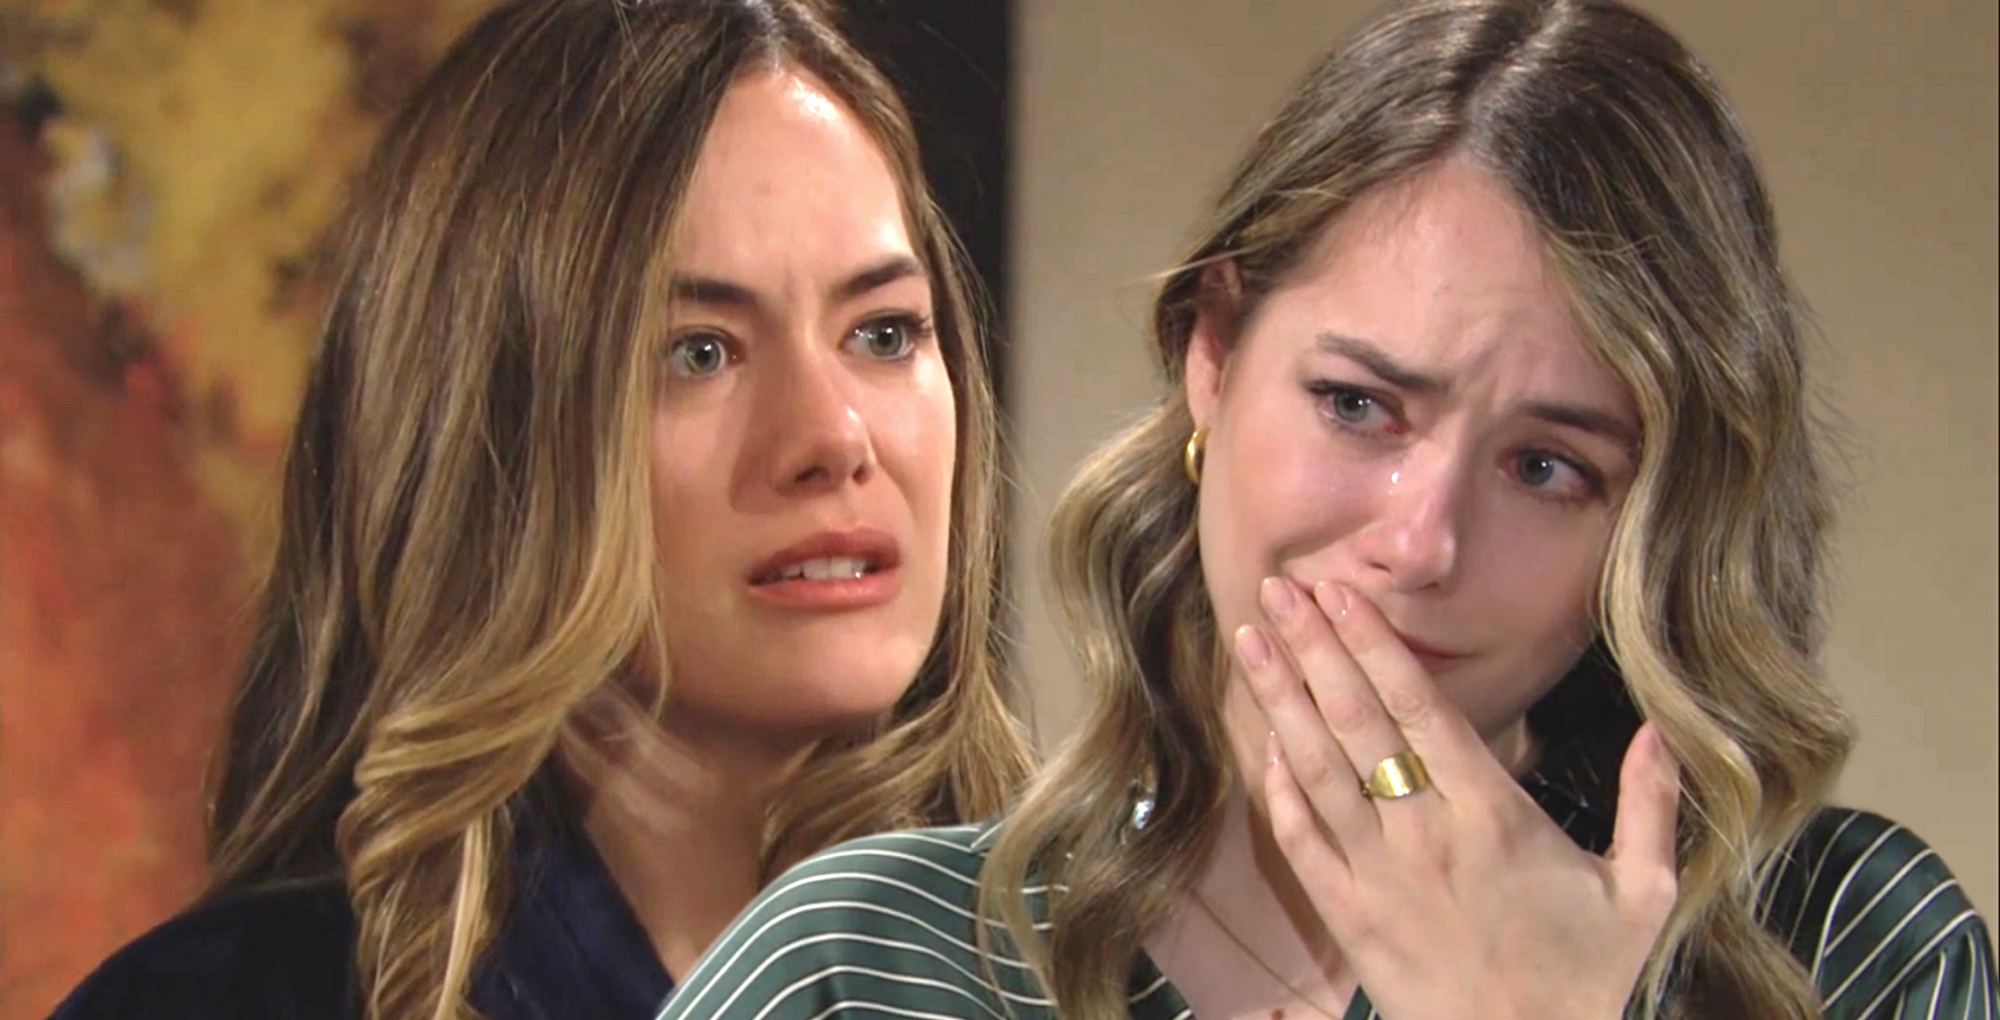 hope logan spencer struggles with a lot of stress on bold and the beautiful.